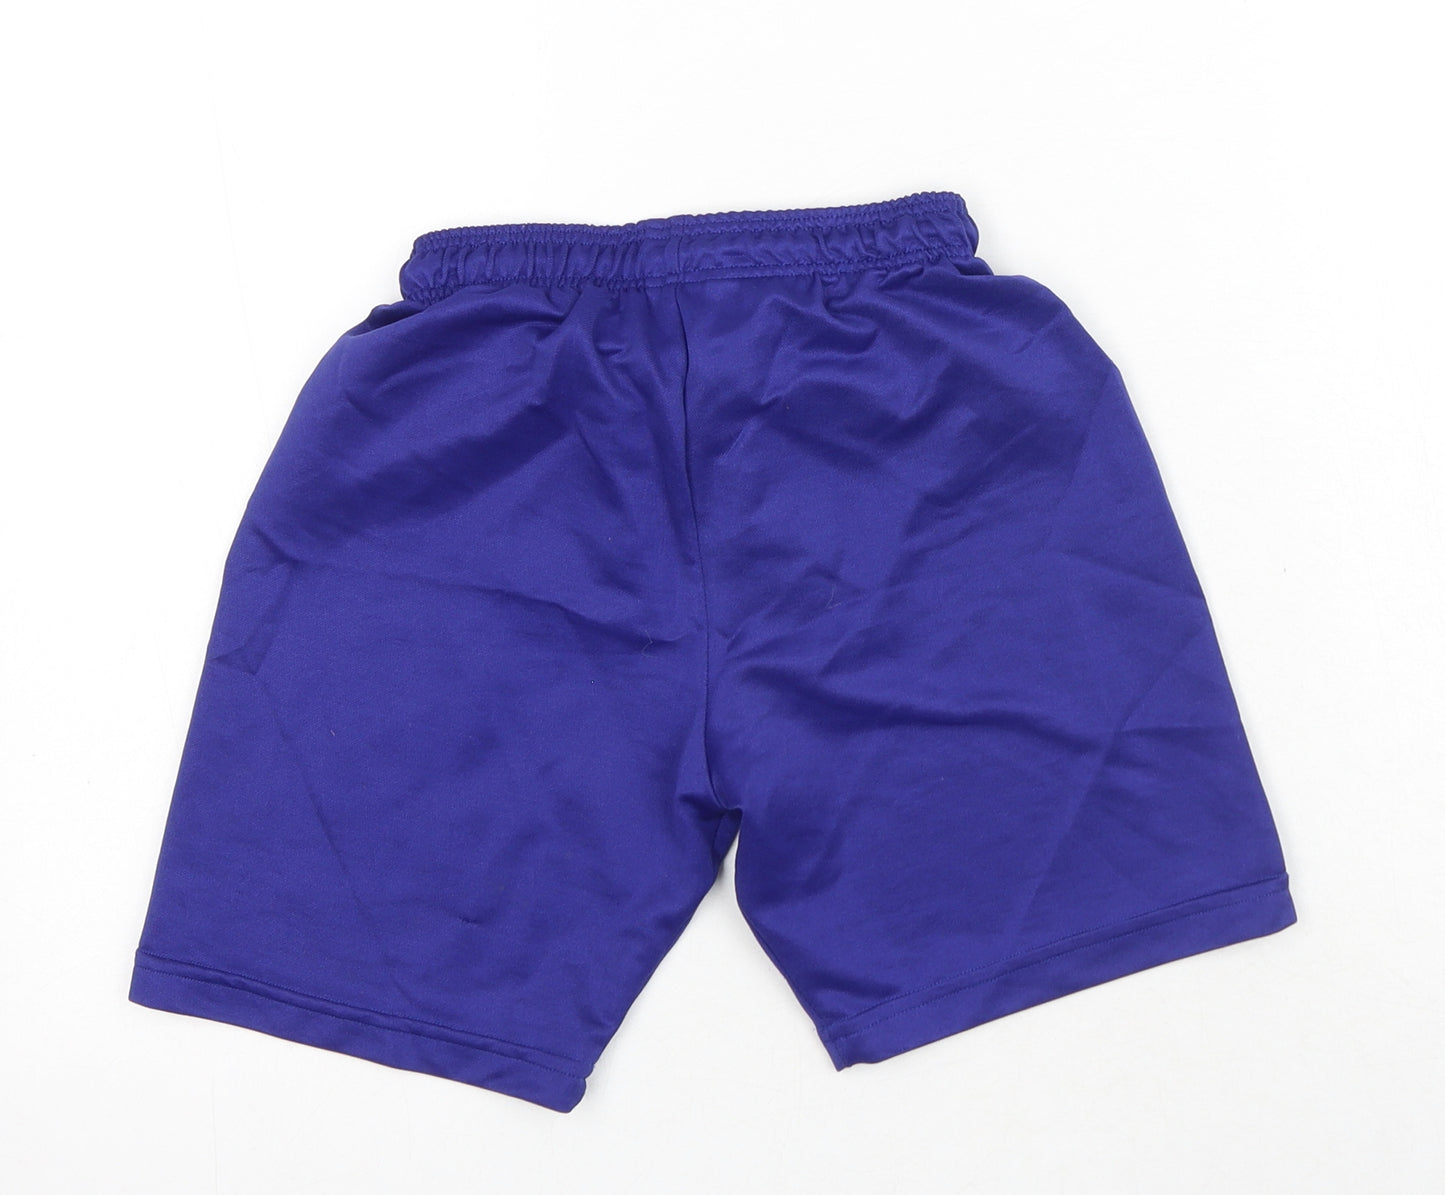 Tesco Boys Blue Polyester Sweat Shorts Size 7-8 Years Regular Drawstring - Daffy Duck This Means War